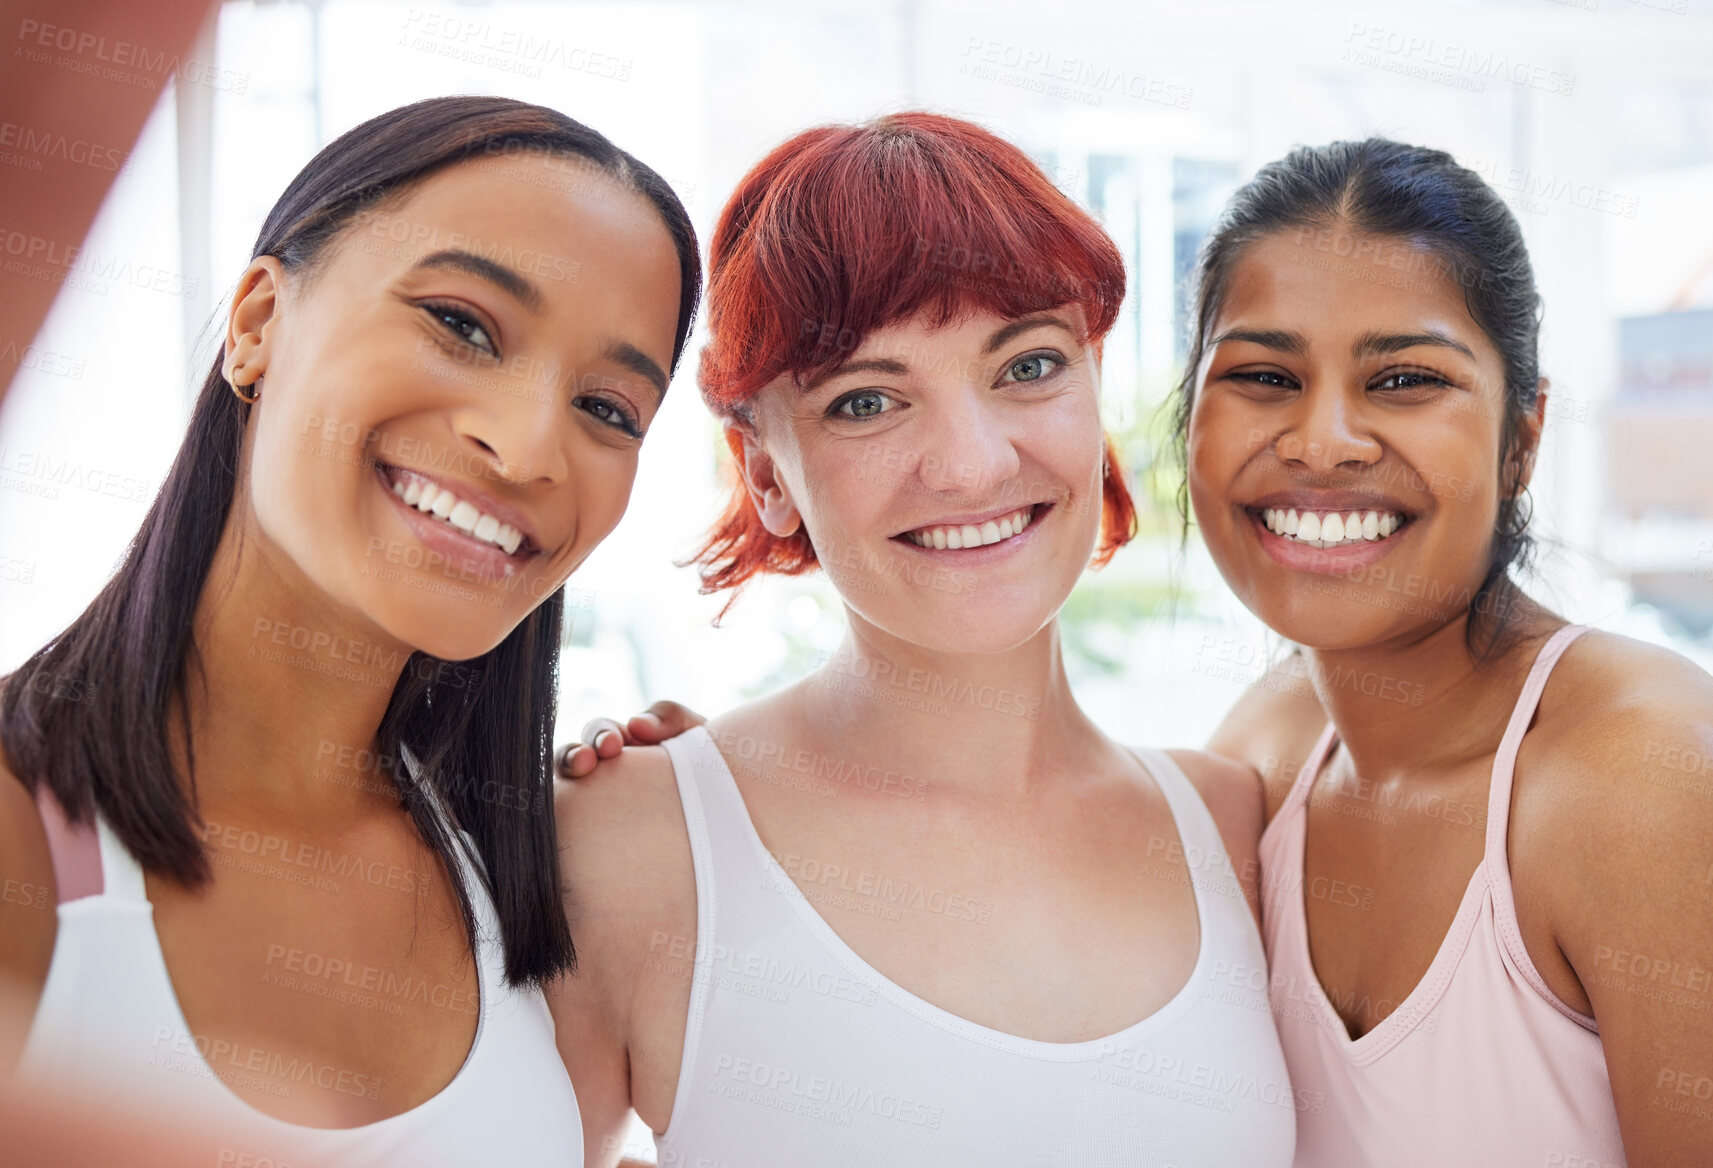 Buy stock photo Portrait of a group of sporty young women taking selfies together in a yoga studio